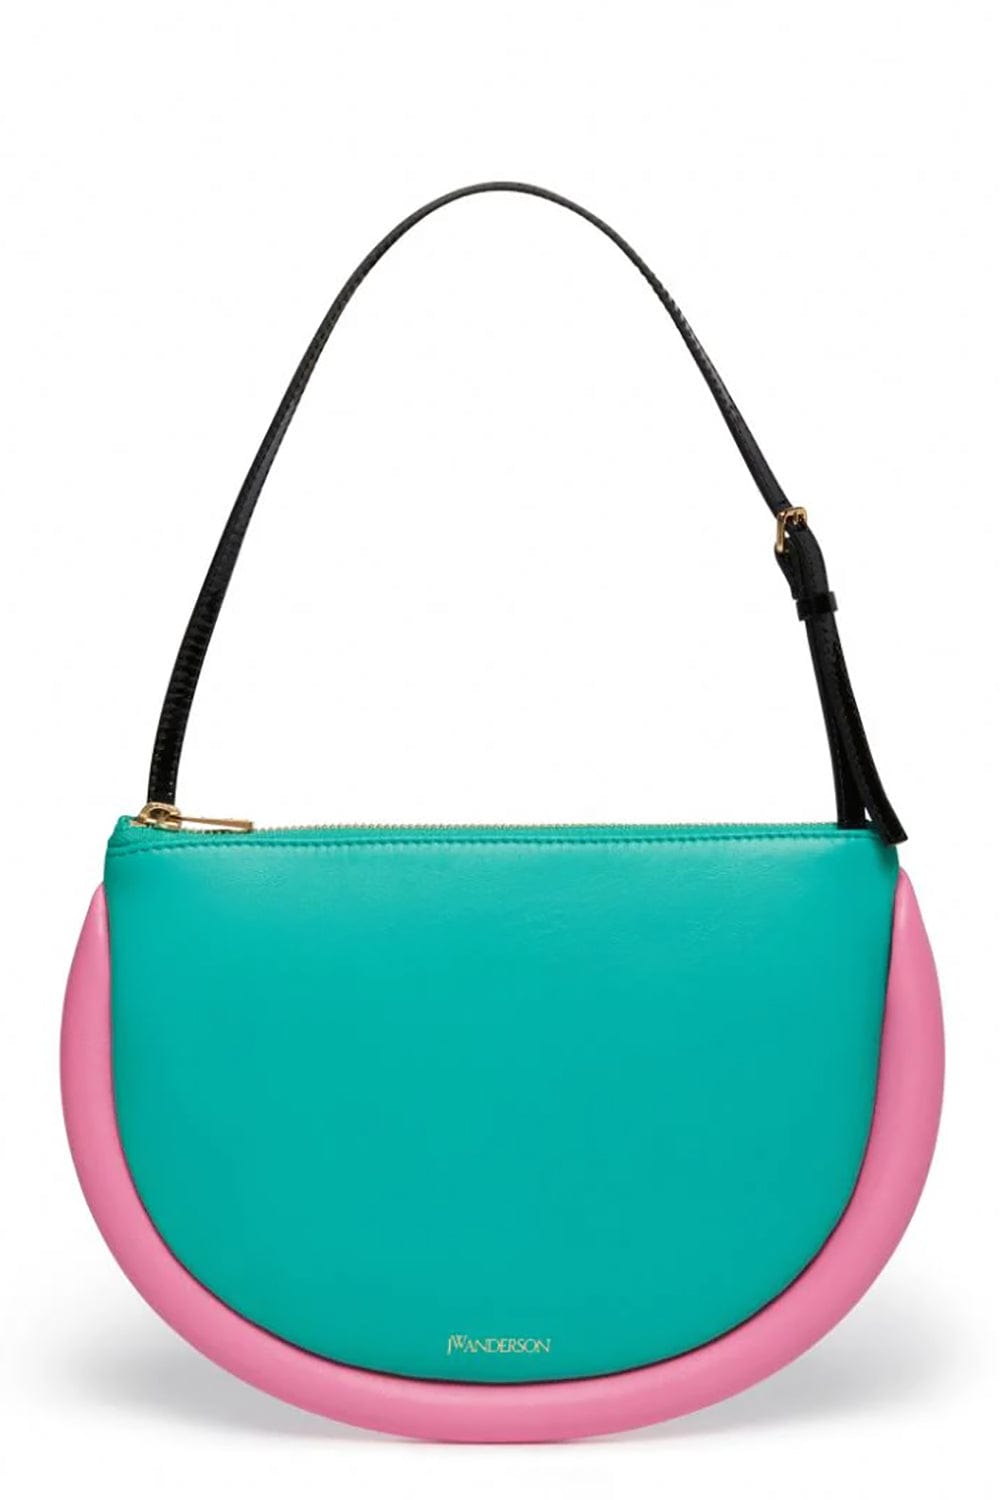 JW ANDERSON-The Bumper Moon Bag-TURQUOISE PINK